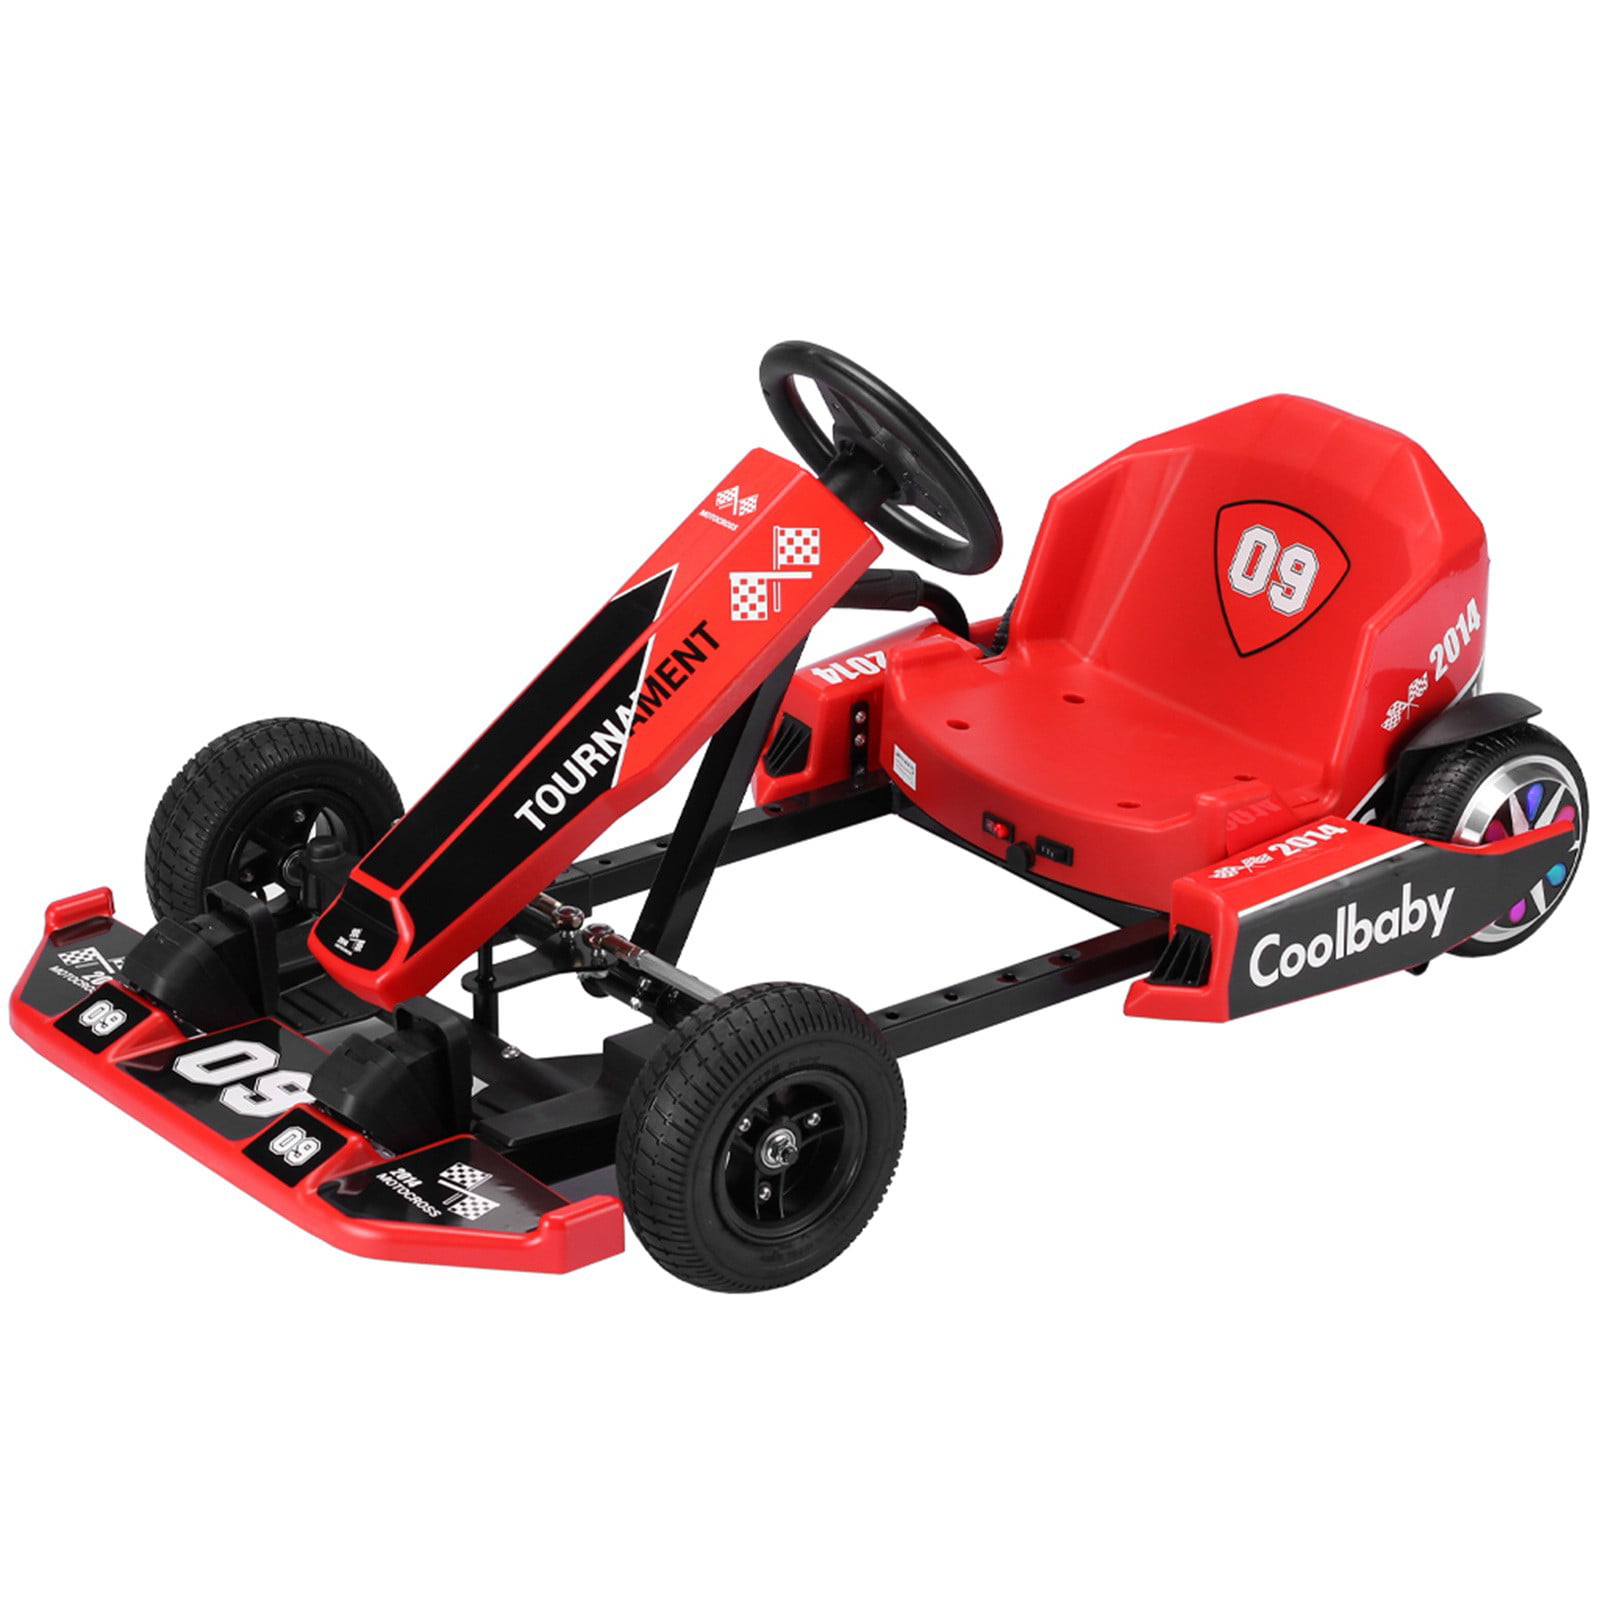 With Flashing Lights Outdoor Racing Scooter,Riding Toy Details about   ❤Electric Kart Drifting 